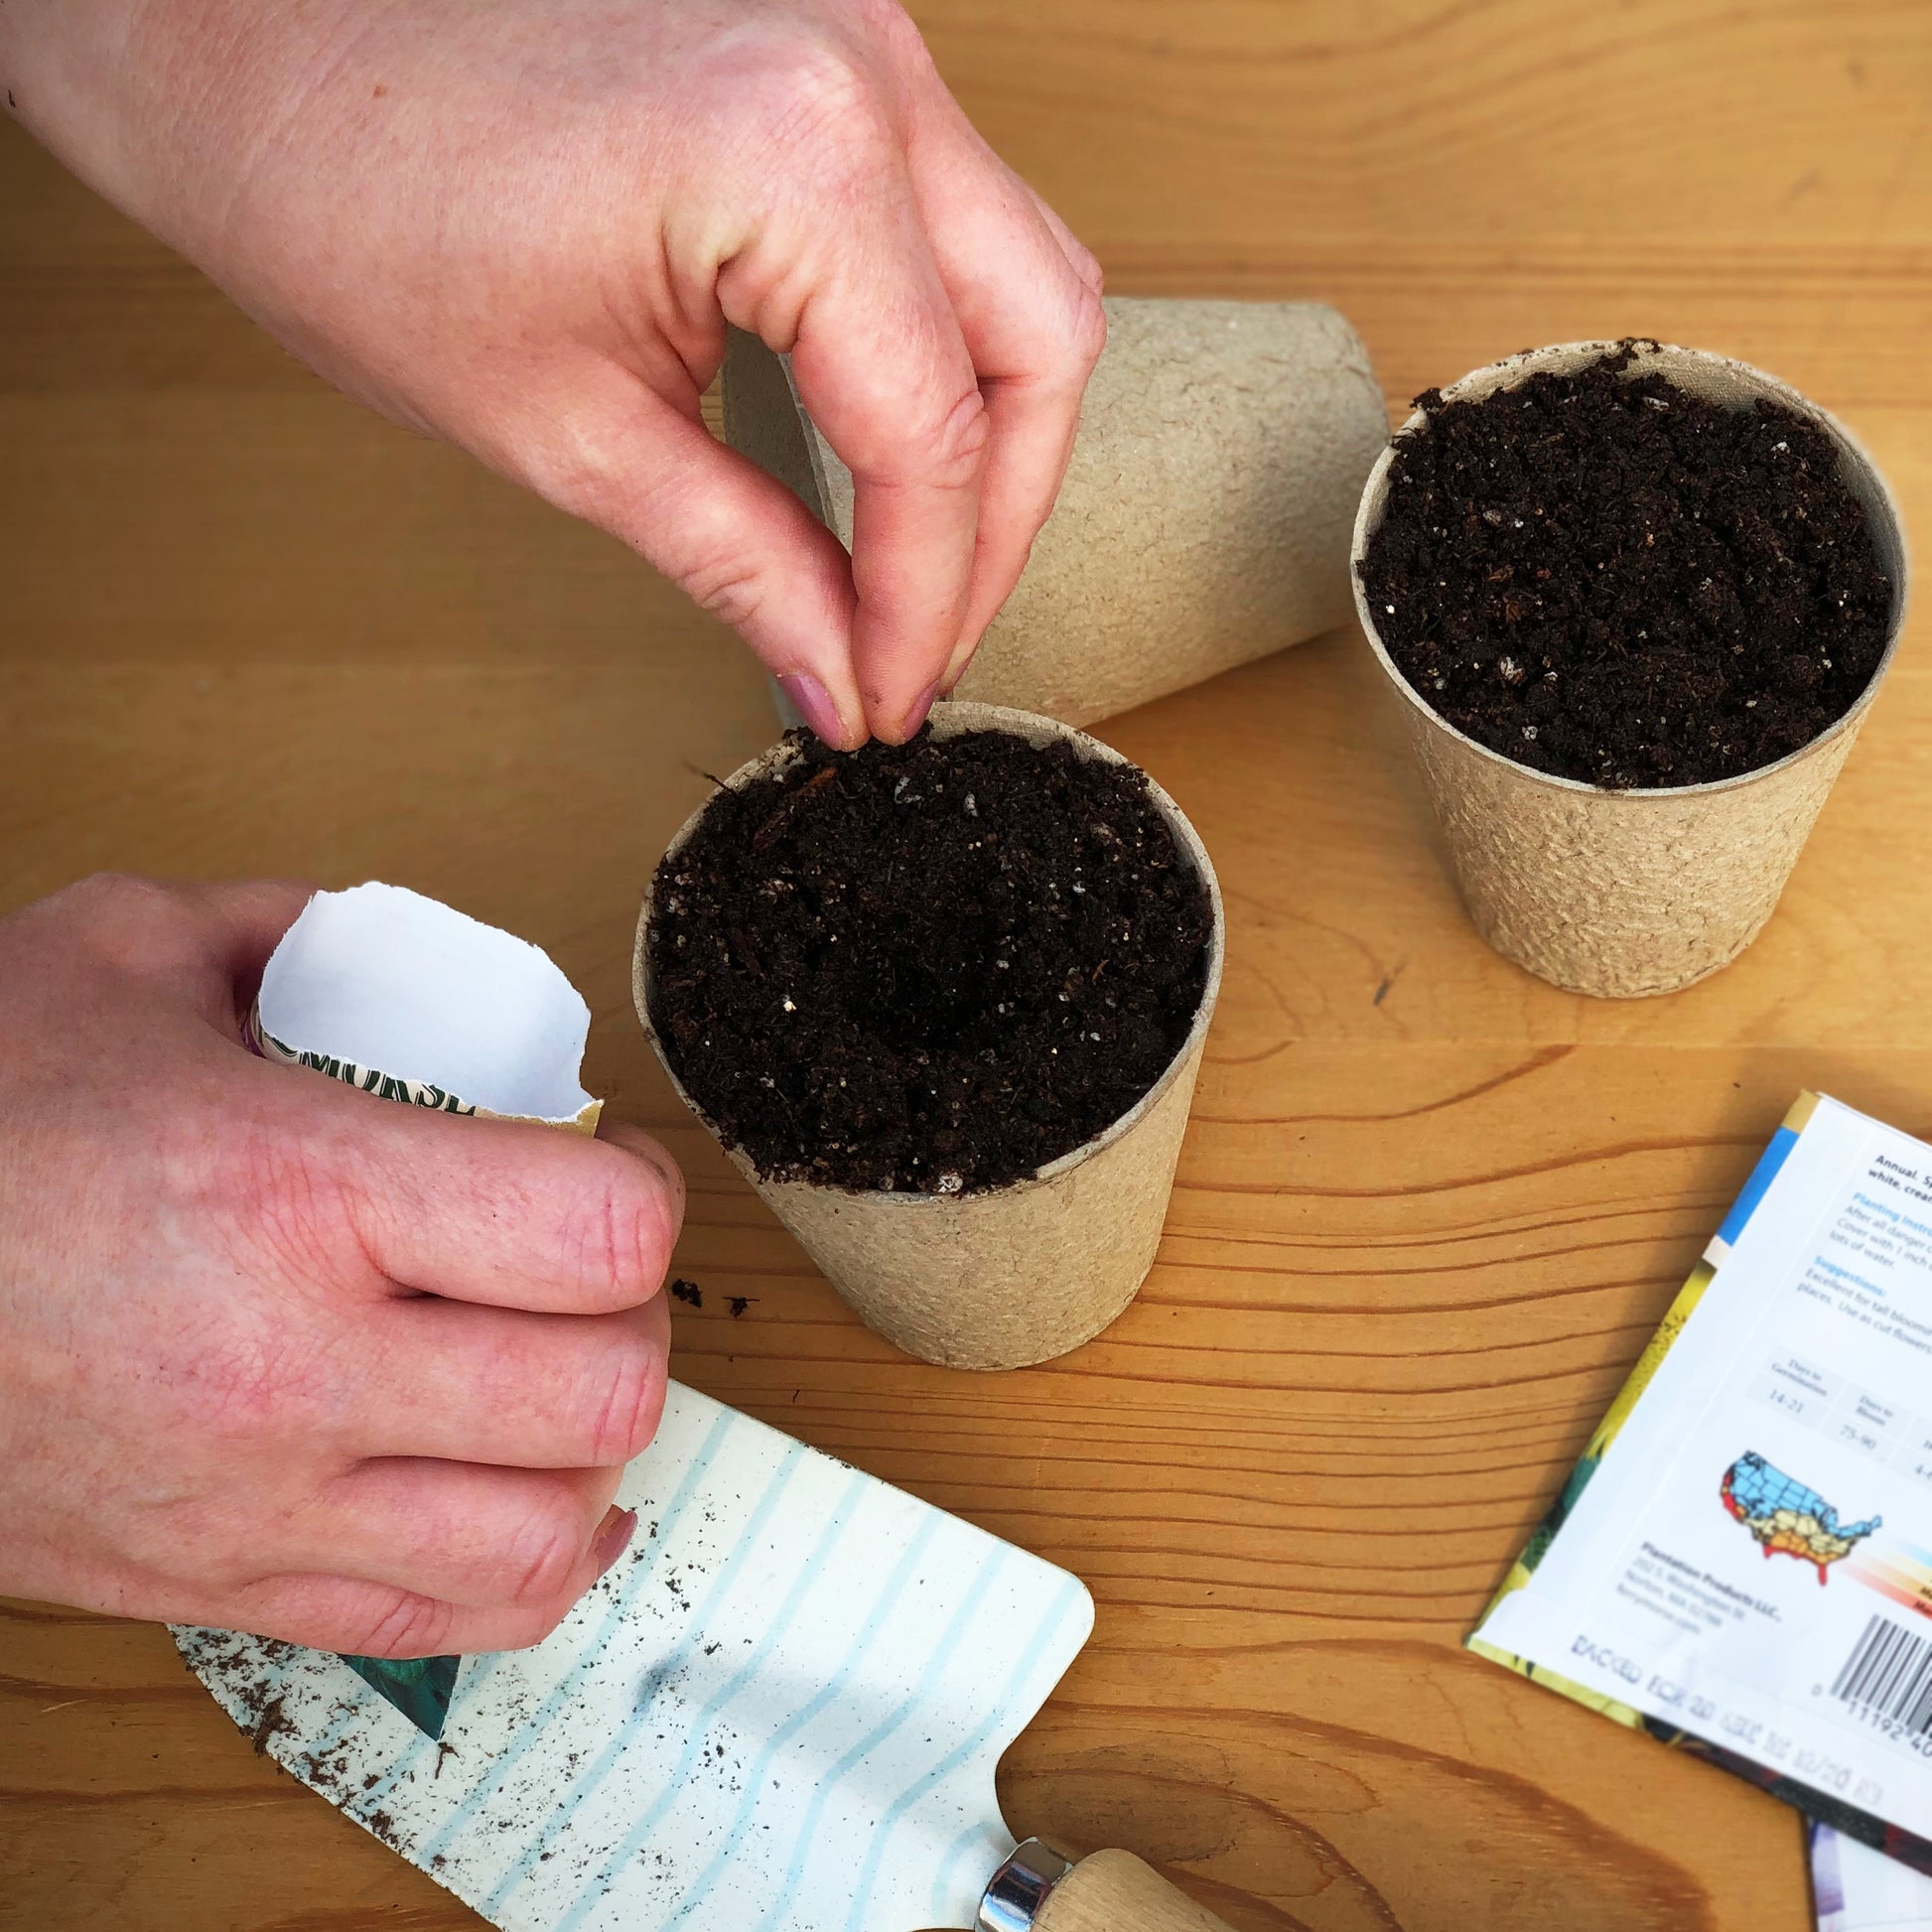 Start your Garden Leader Monster Bell Pepper seeds in biodegradable Jiffy peat pots filled with seed starting mix.